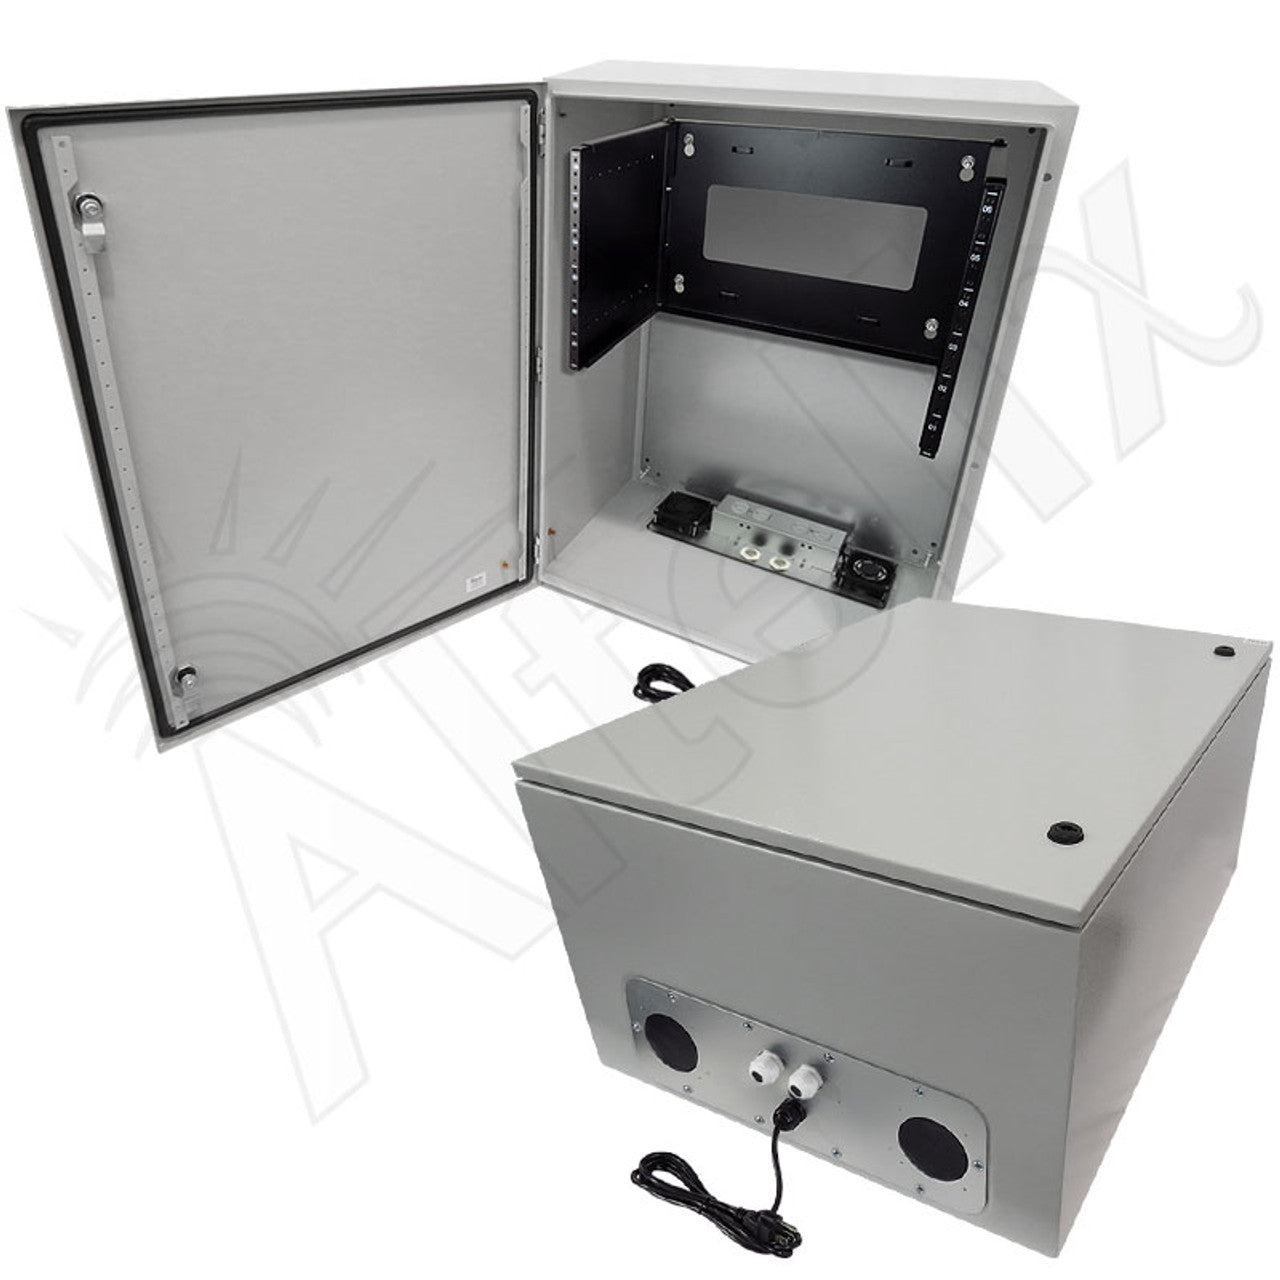 Altelix 19" Wide 6U Rack Steel Weatherproof NEMA Enclosure with Dual Cooling Fans, 120 VAC Outlets and Power Cord-5